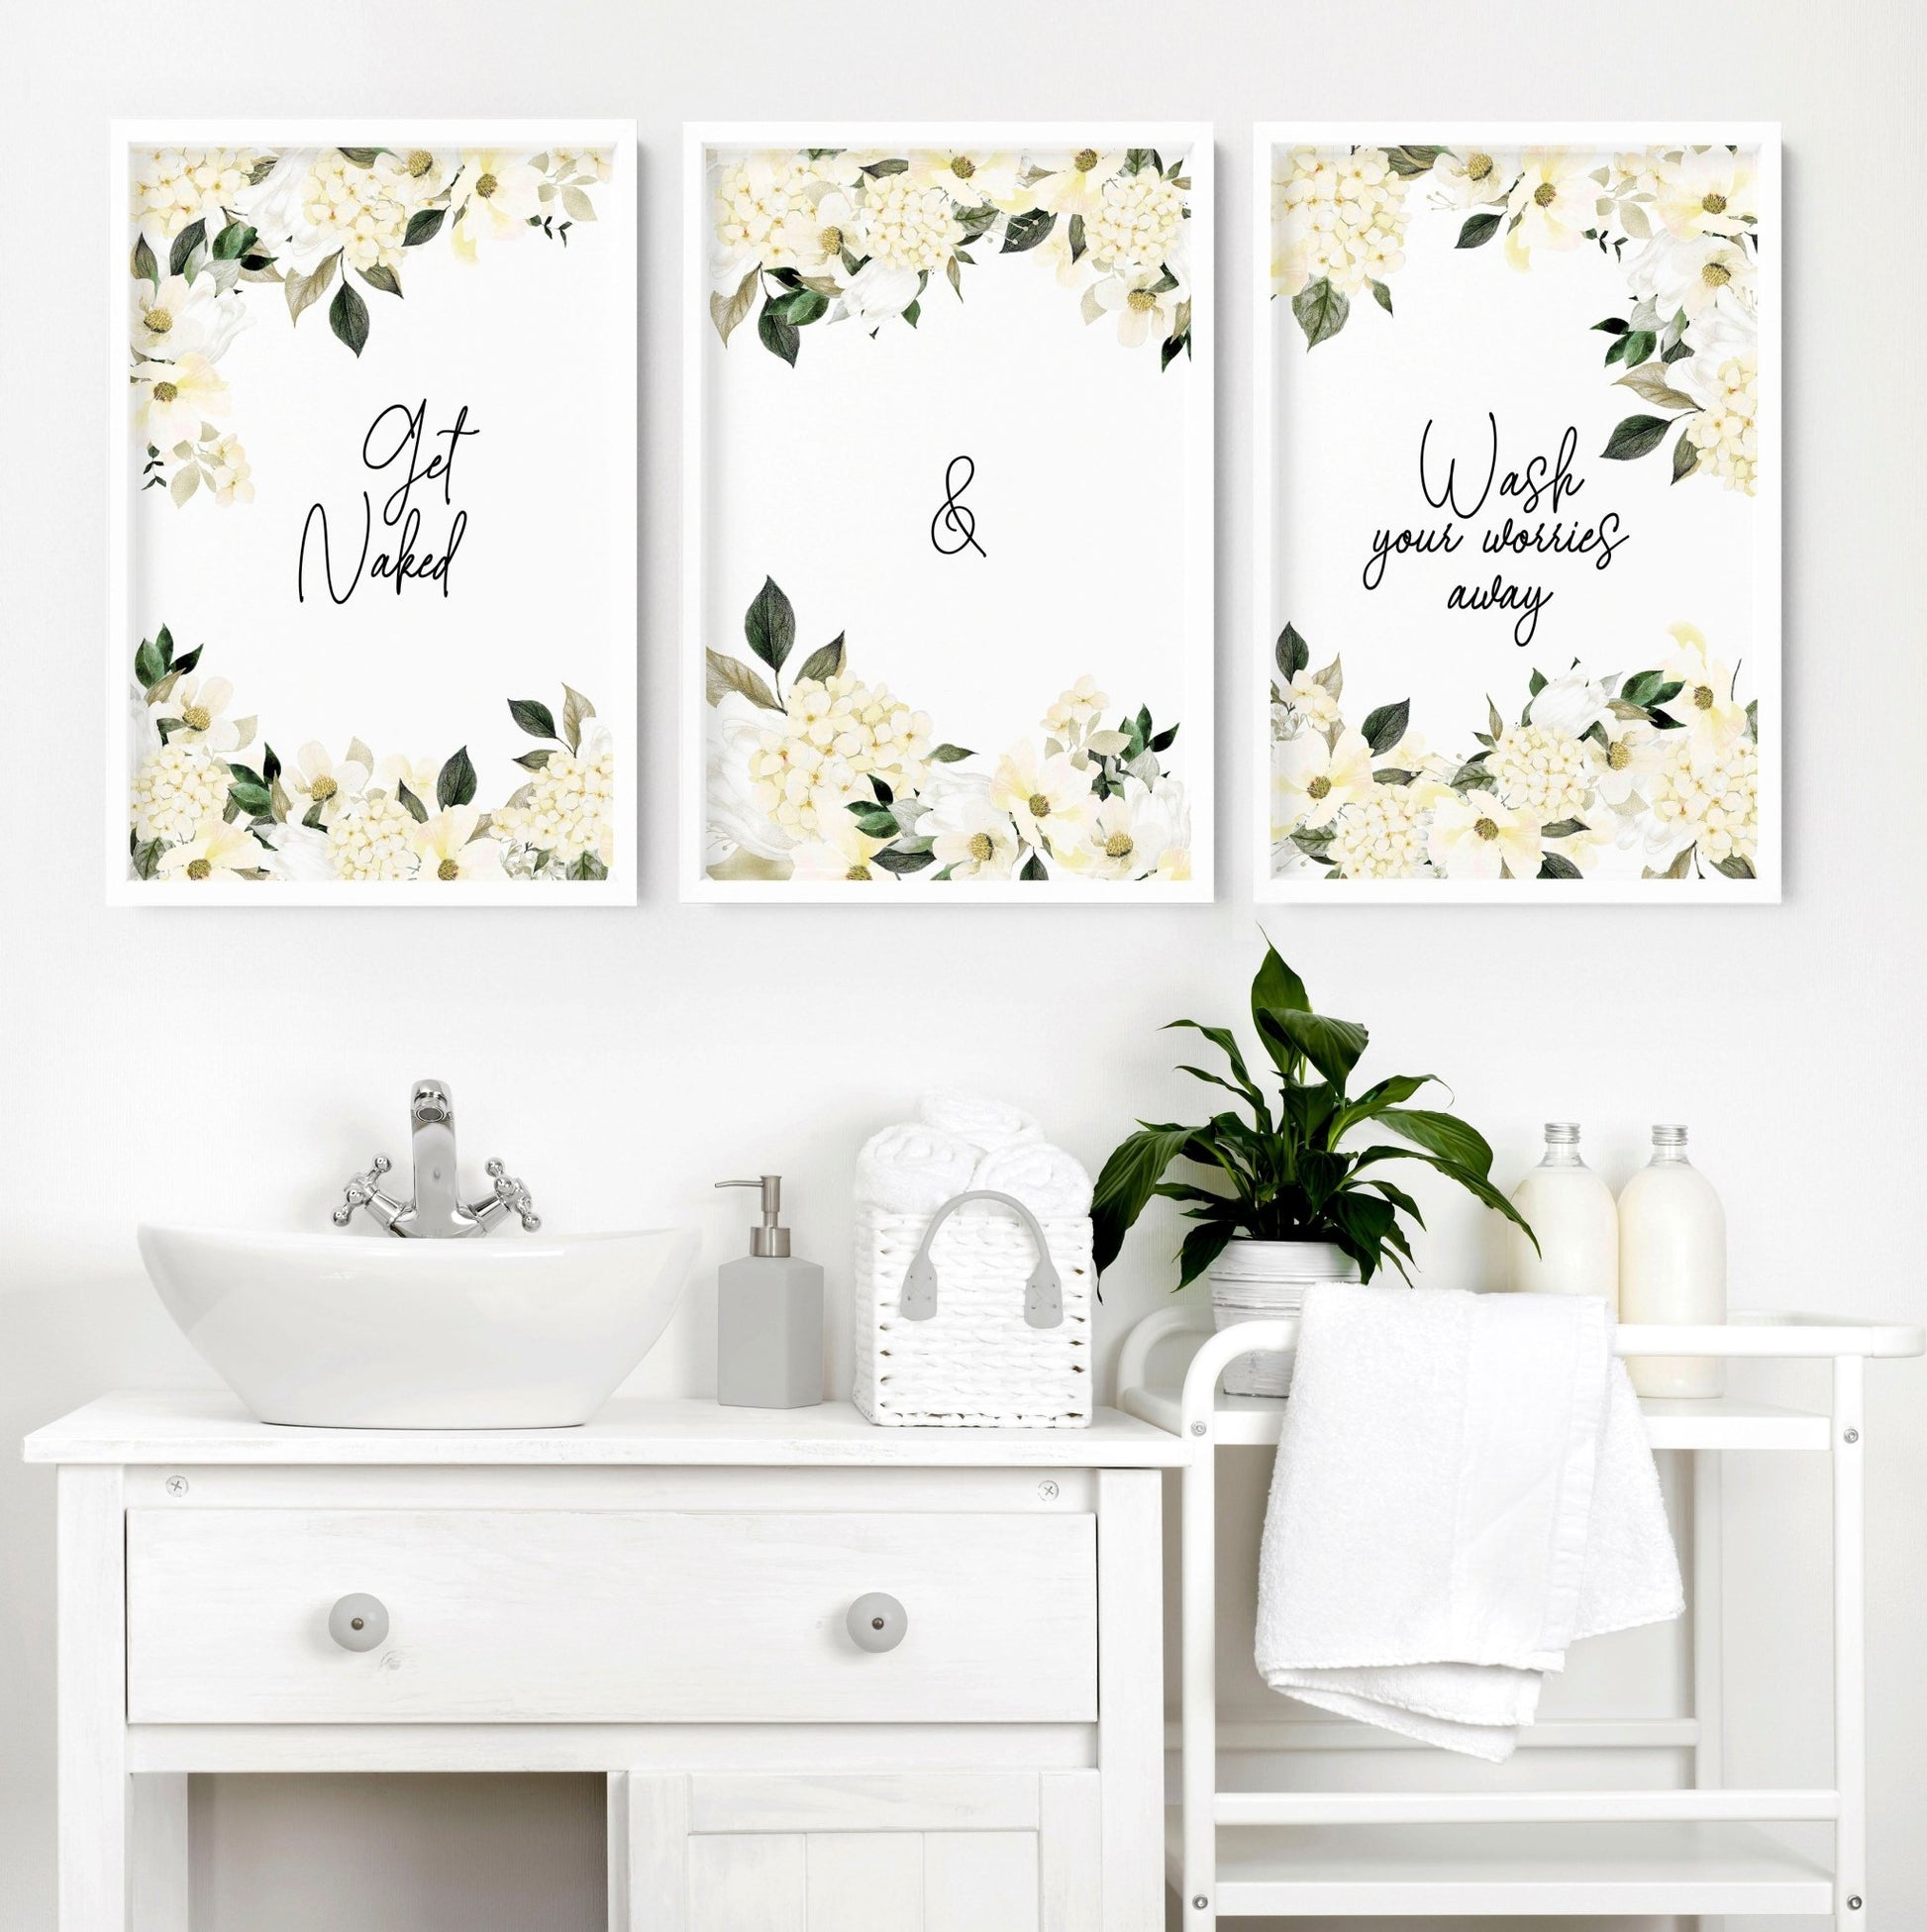 Shabby Chic bathroom prints | set of 3 wall art - About Wall Art